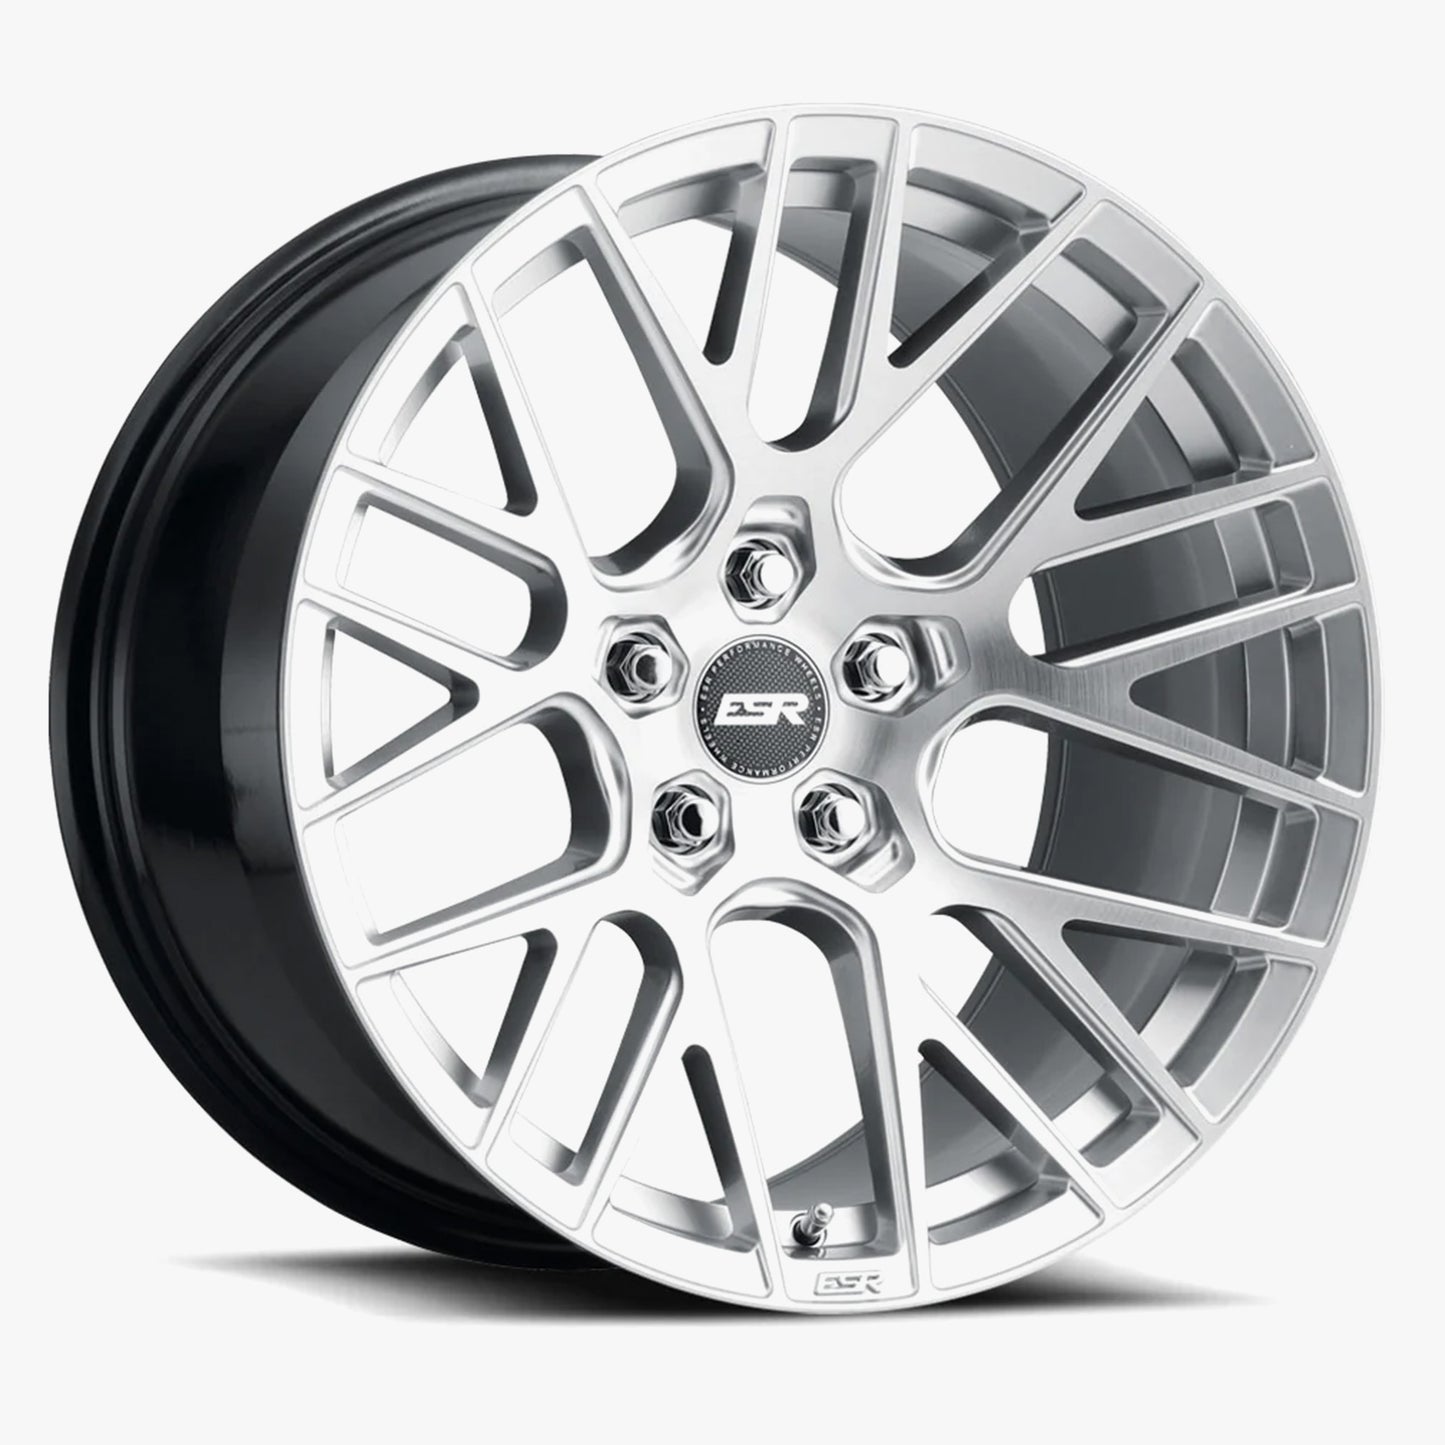 FORGETECH SERIES RF11 Brushed Hyper Silver Brushed Hyper Silver 20x10.5 +25 5x115 (Custom Drill)